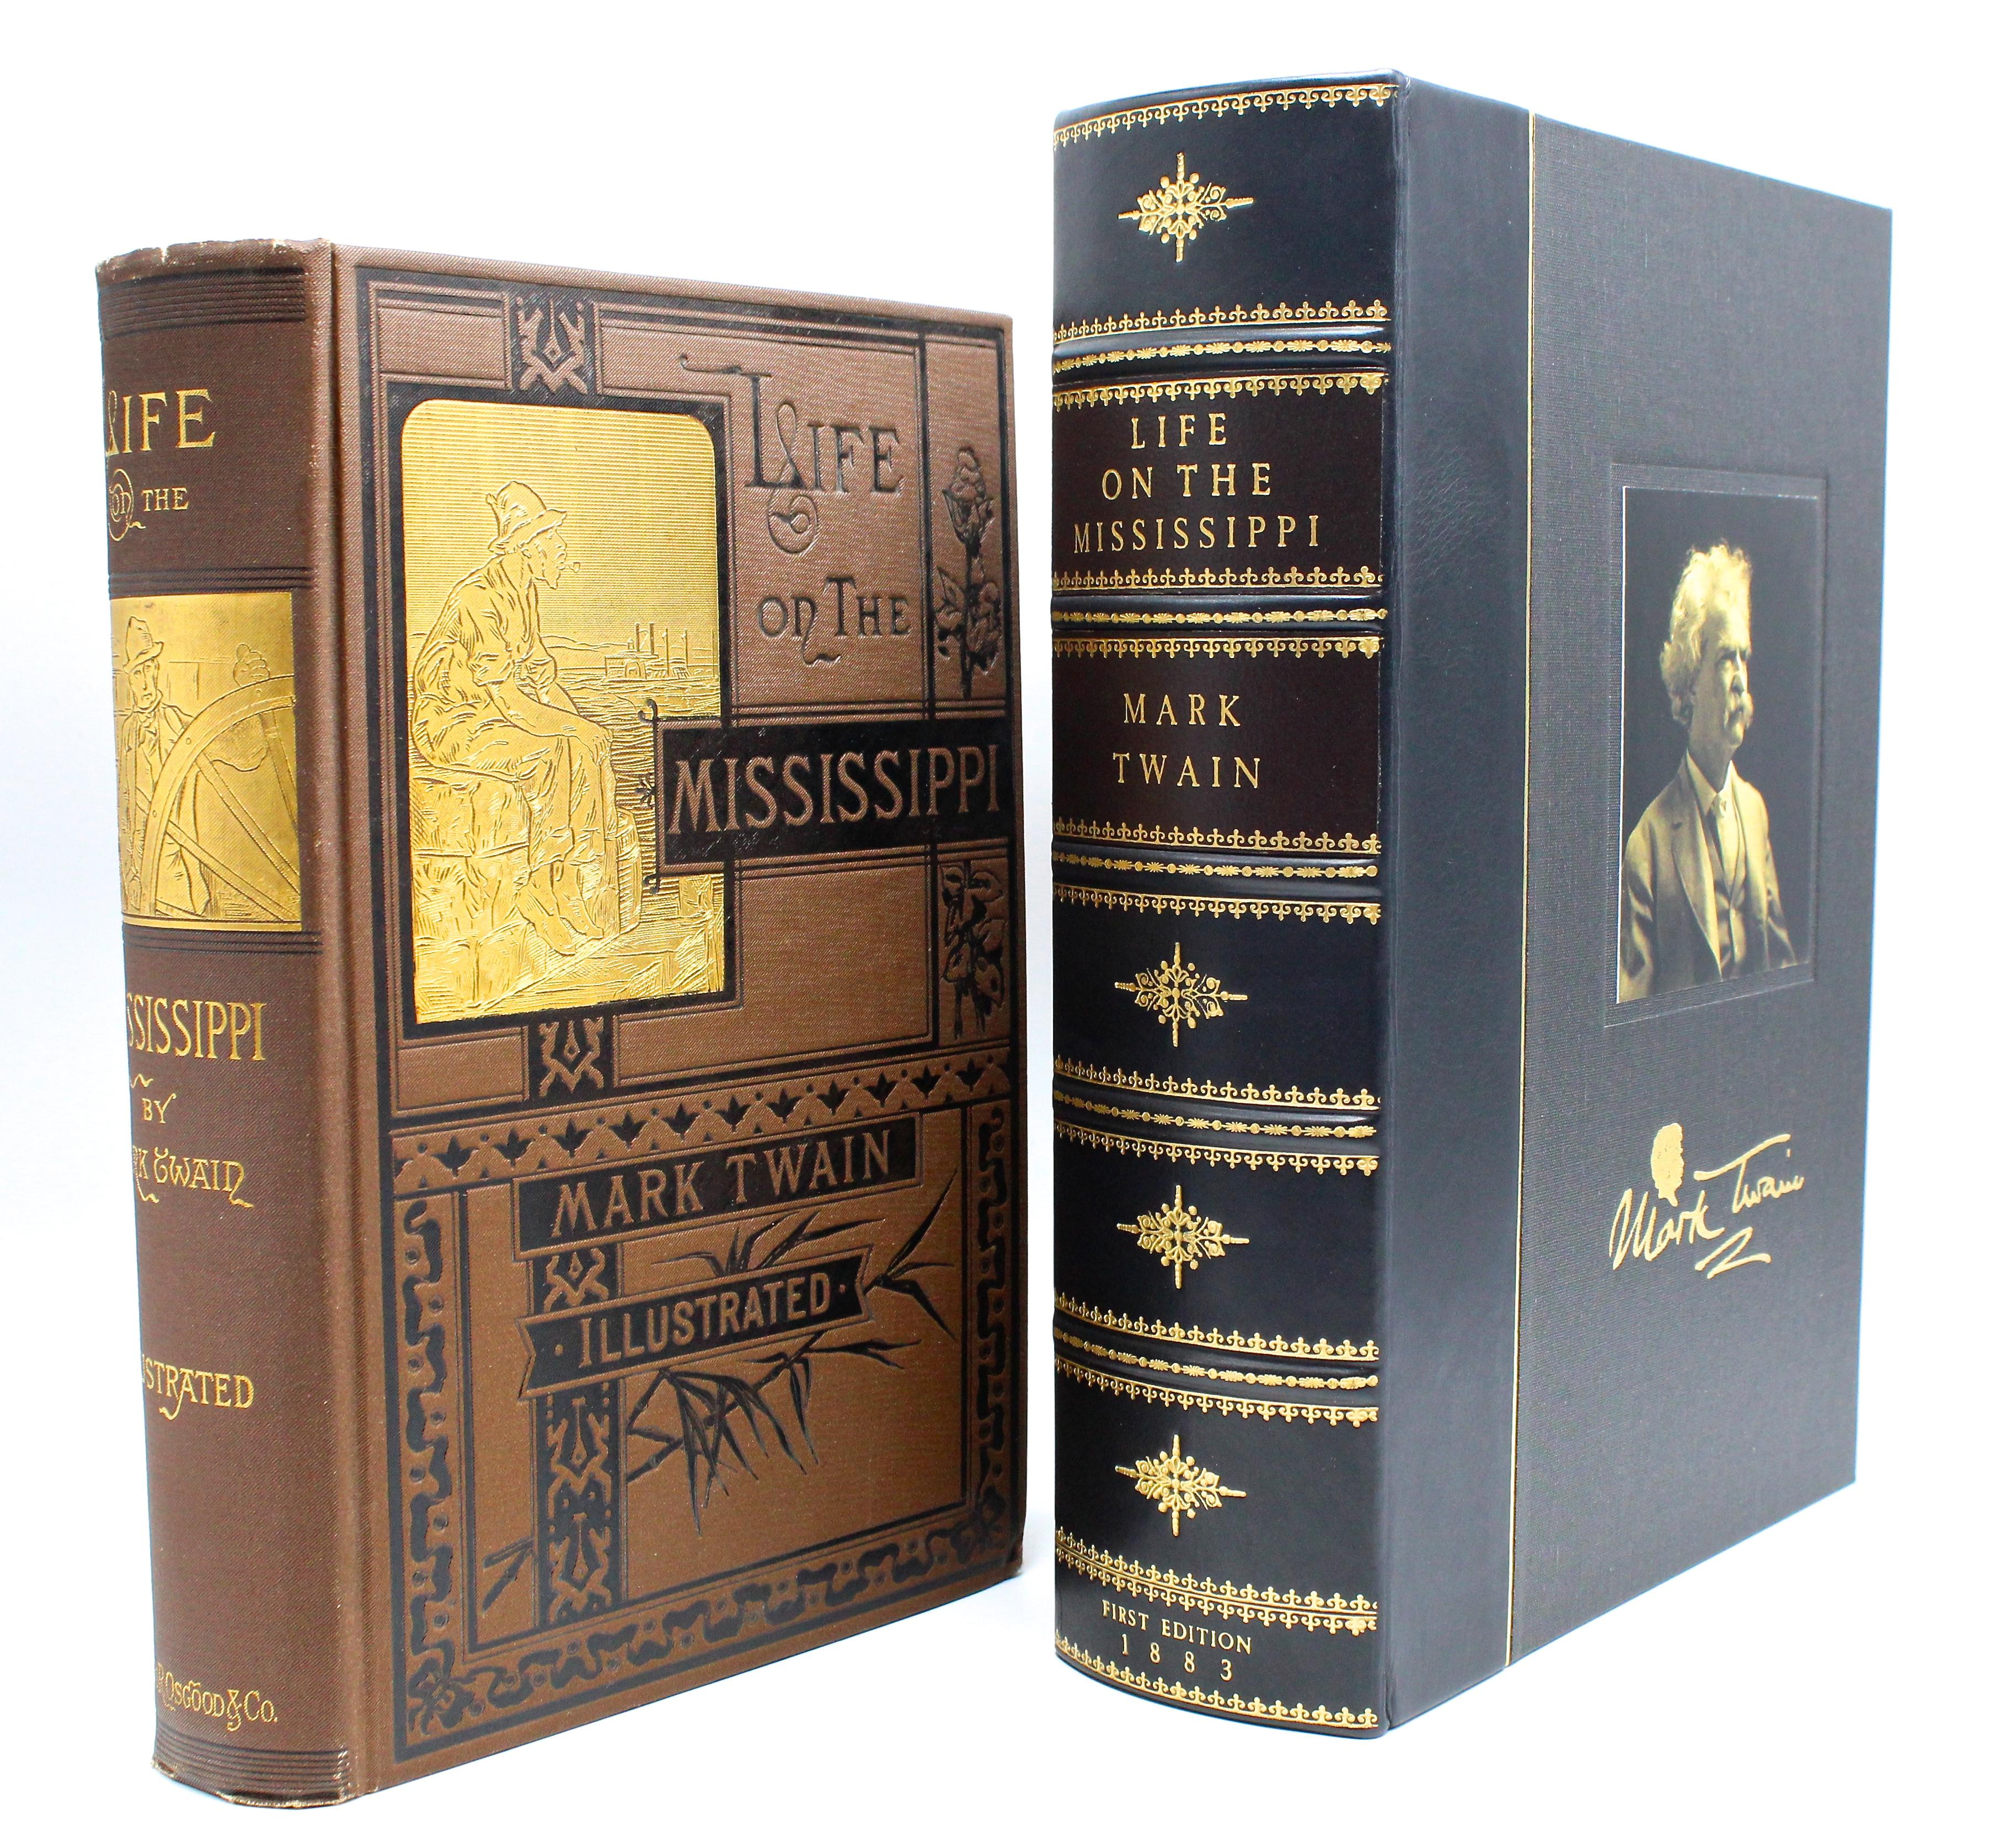 Twain, Mark. Life on the Mississippi. Boston: James R. Osgood and Co., 1883. First edition, second state, and illustrated. Presented in custom archival clamshell.

This first edition Life on the Mississippi by Mark Twain was published in 1883 by